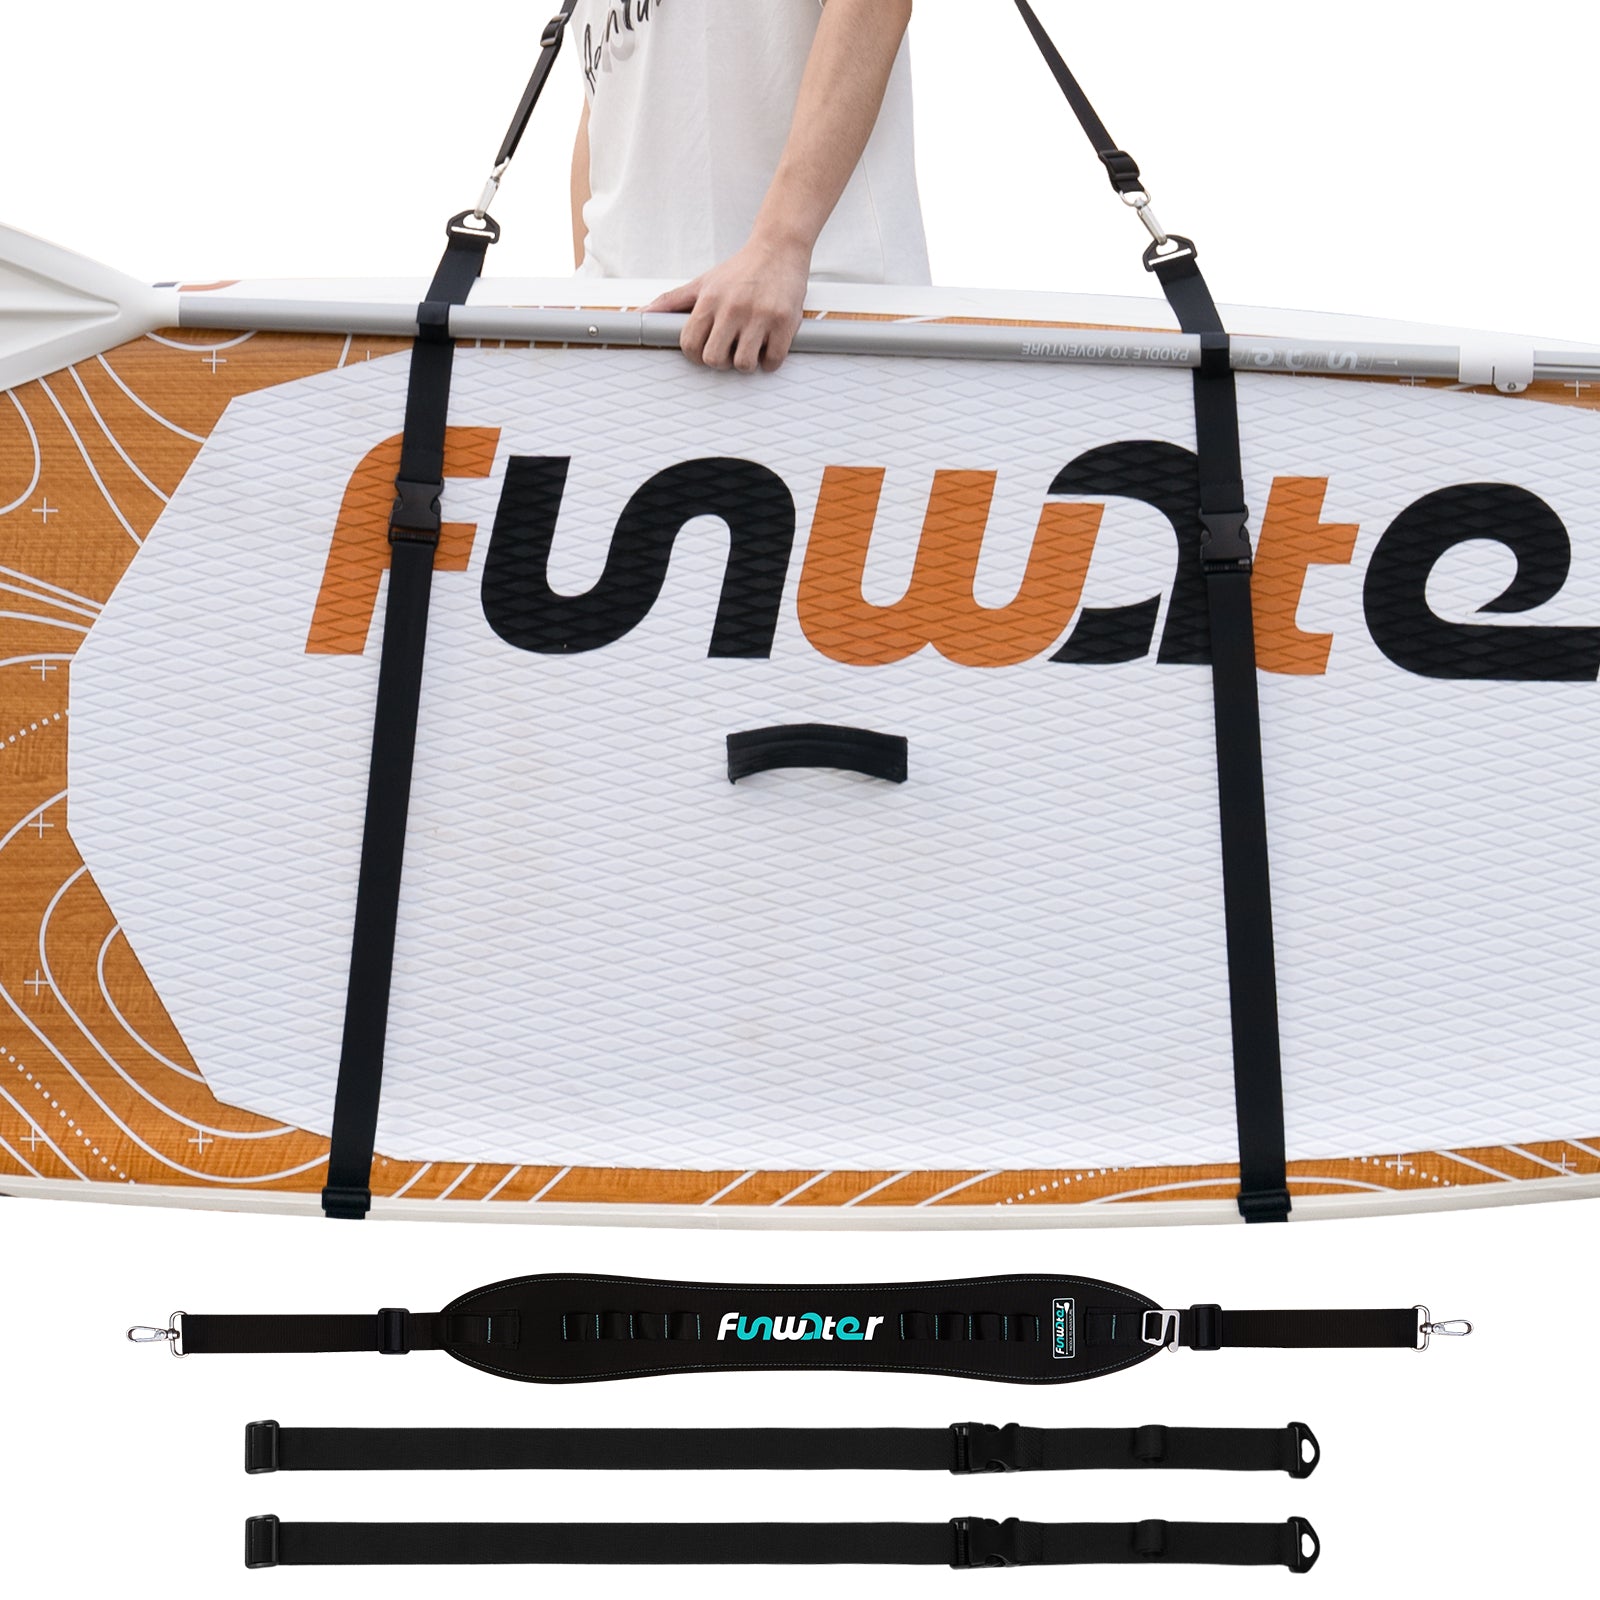 FunWater Paddle Board Carry Strap SUP Harness Adjustable Multi-Usage Shoulder Support Strengthen Buckle System for Paddle Board, Surfboard, SUP, Kayak, Canoe,Longboard Accessories